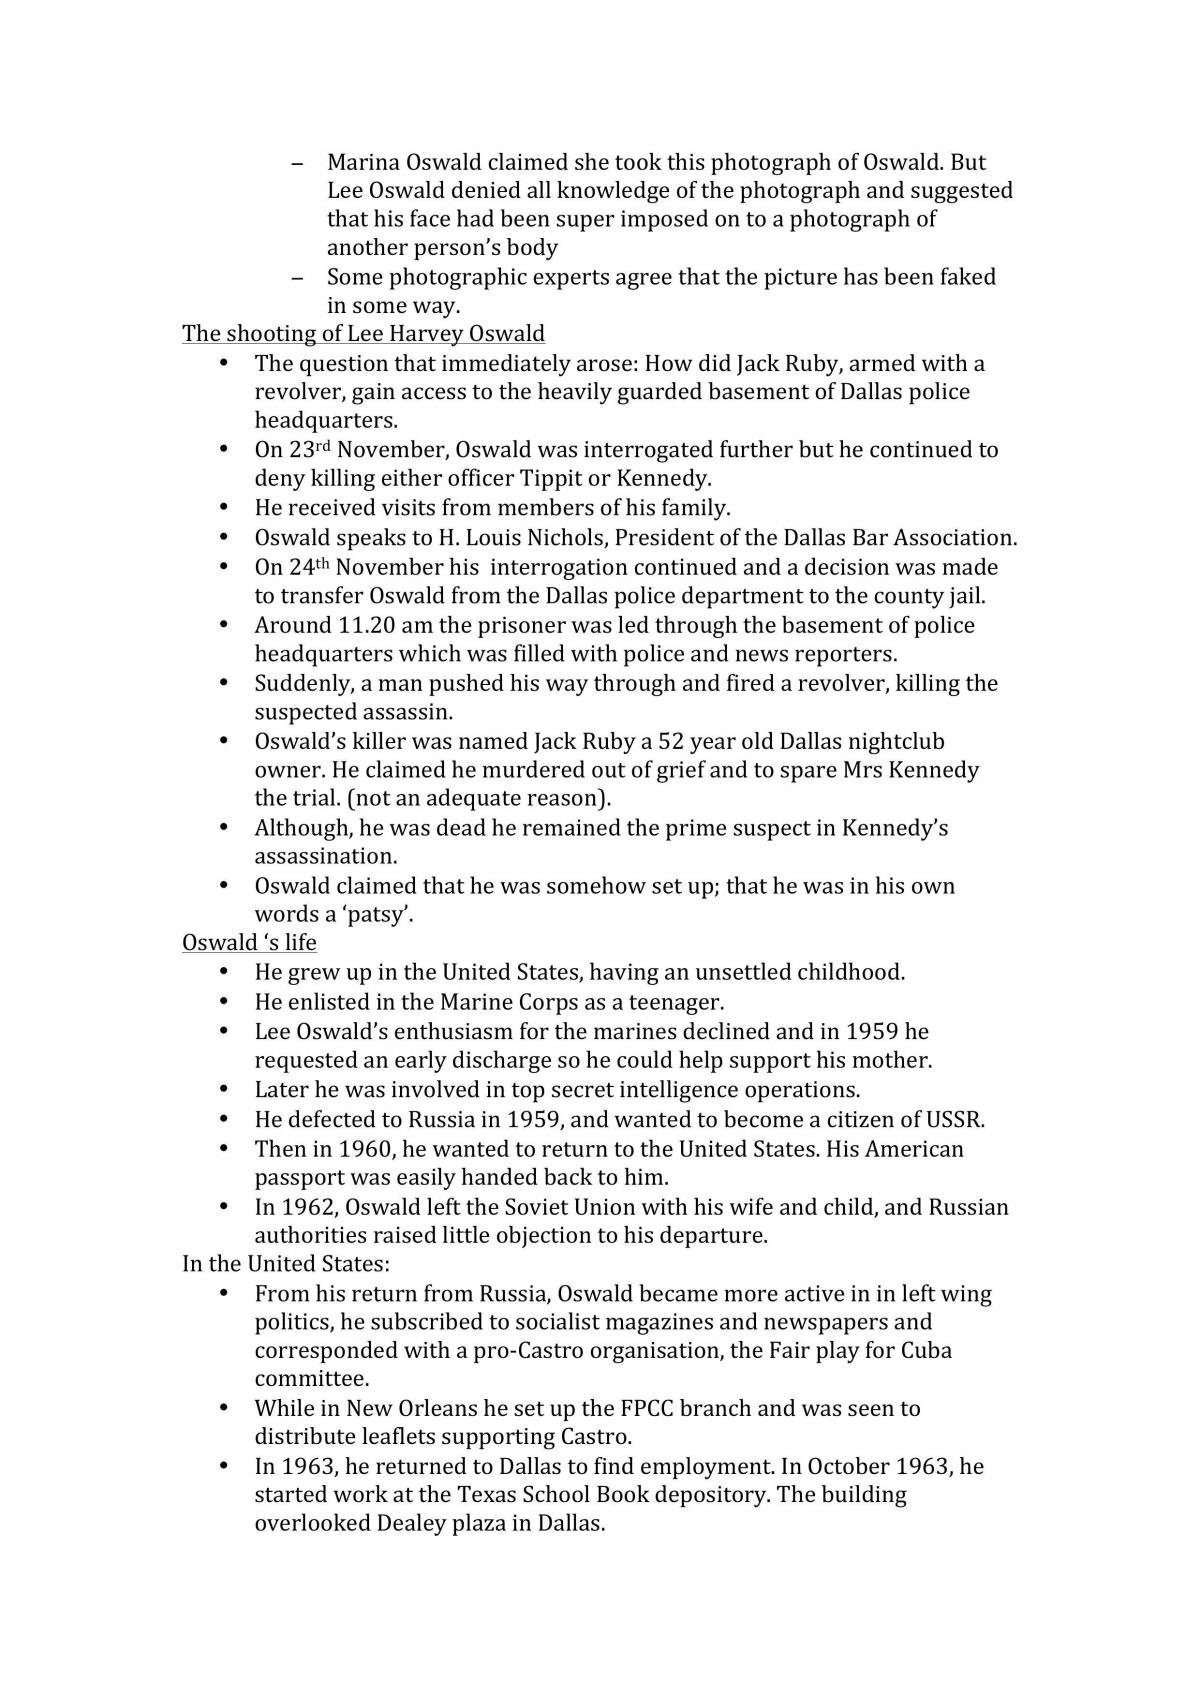 JFK Assassination Comprehensive Notes - Year 11 Modern History  - Page 10